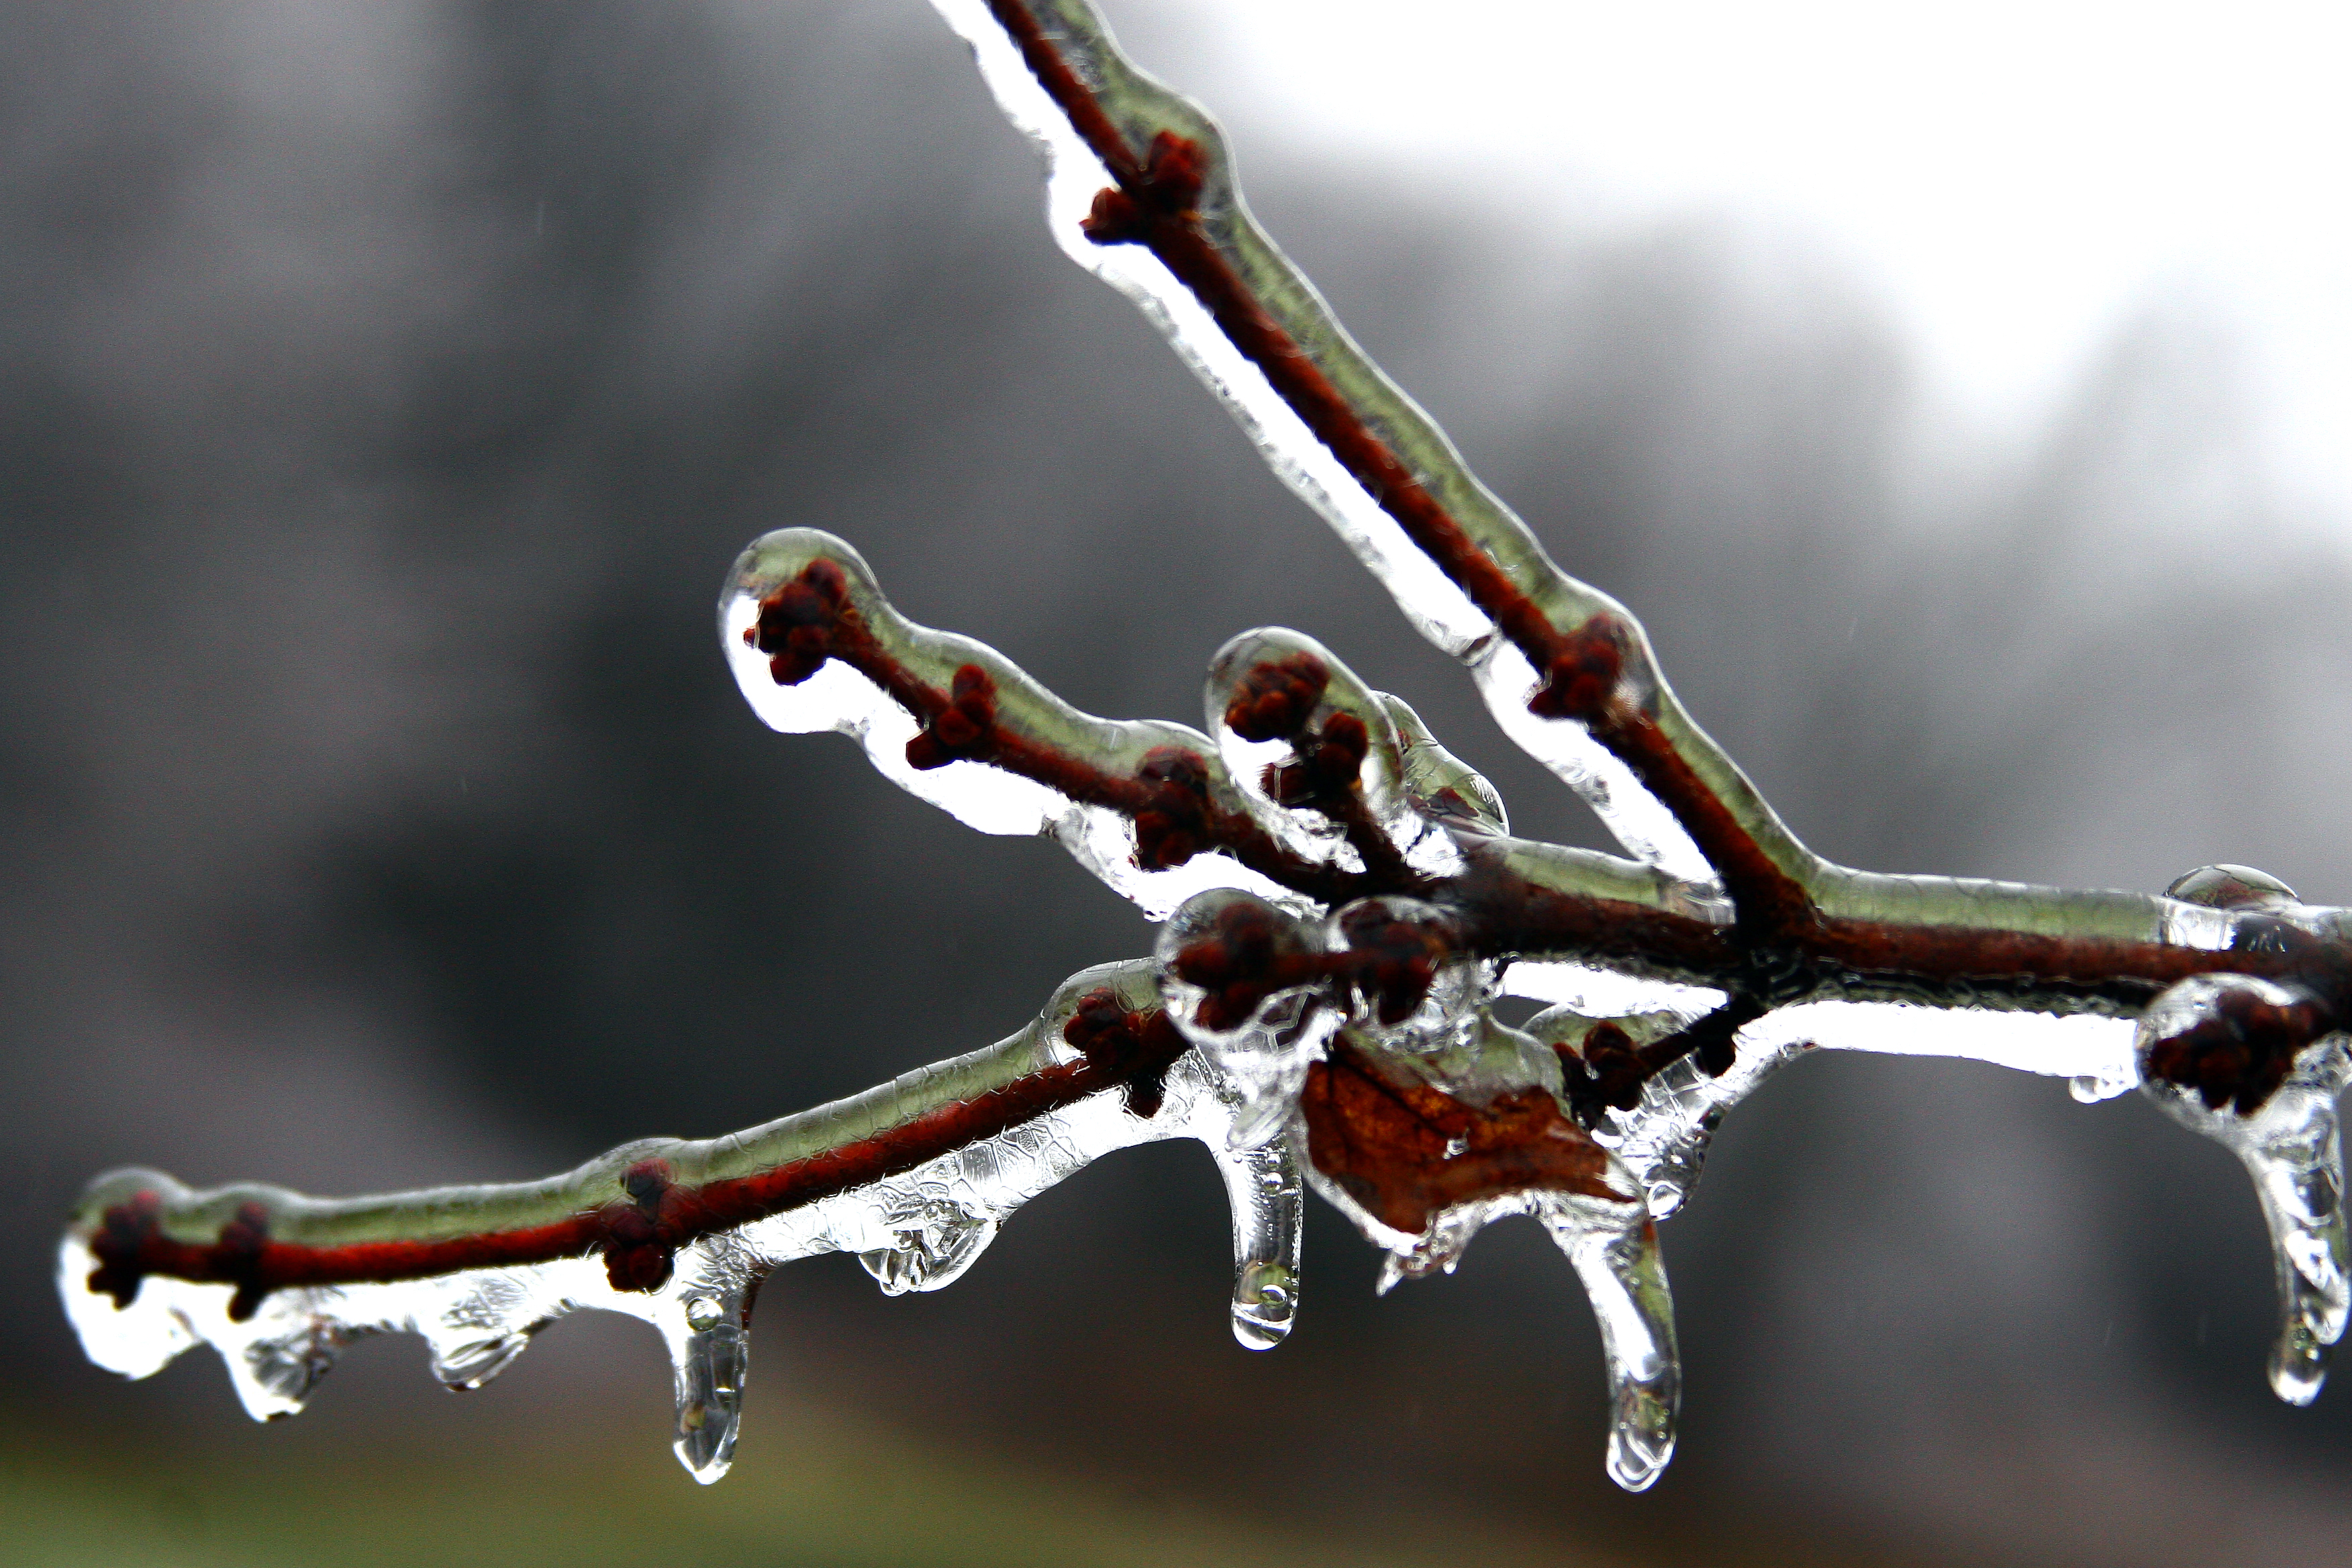 Icy branch photo